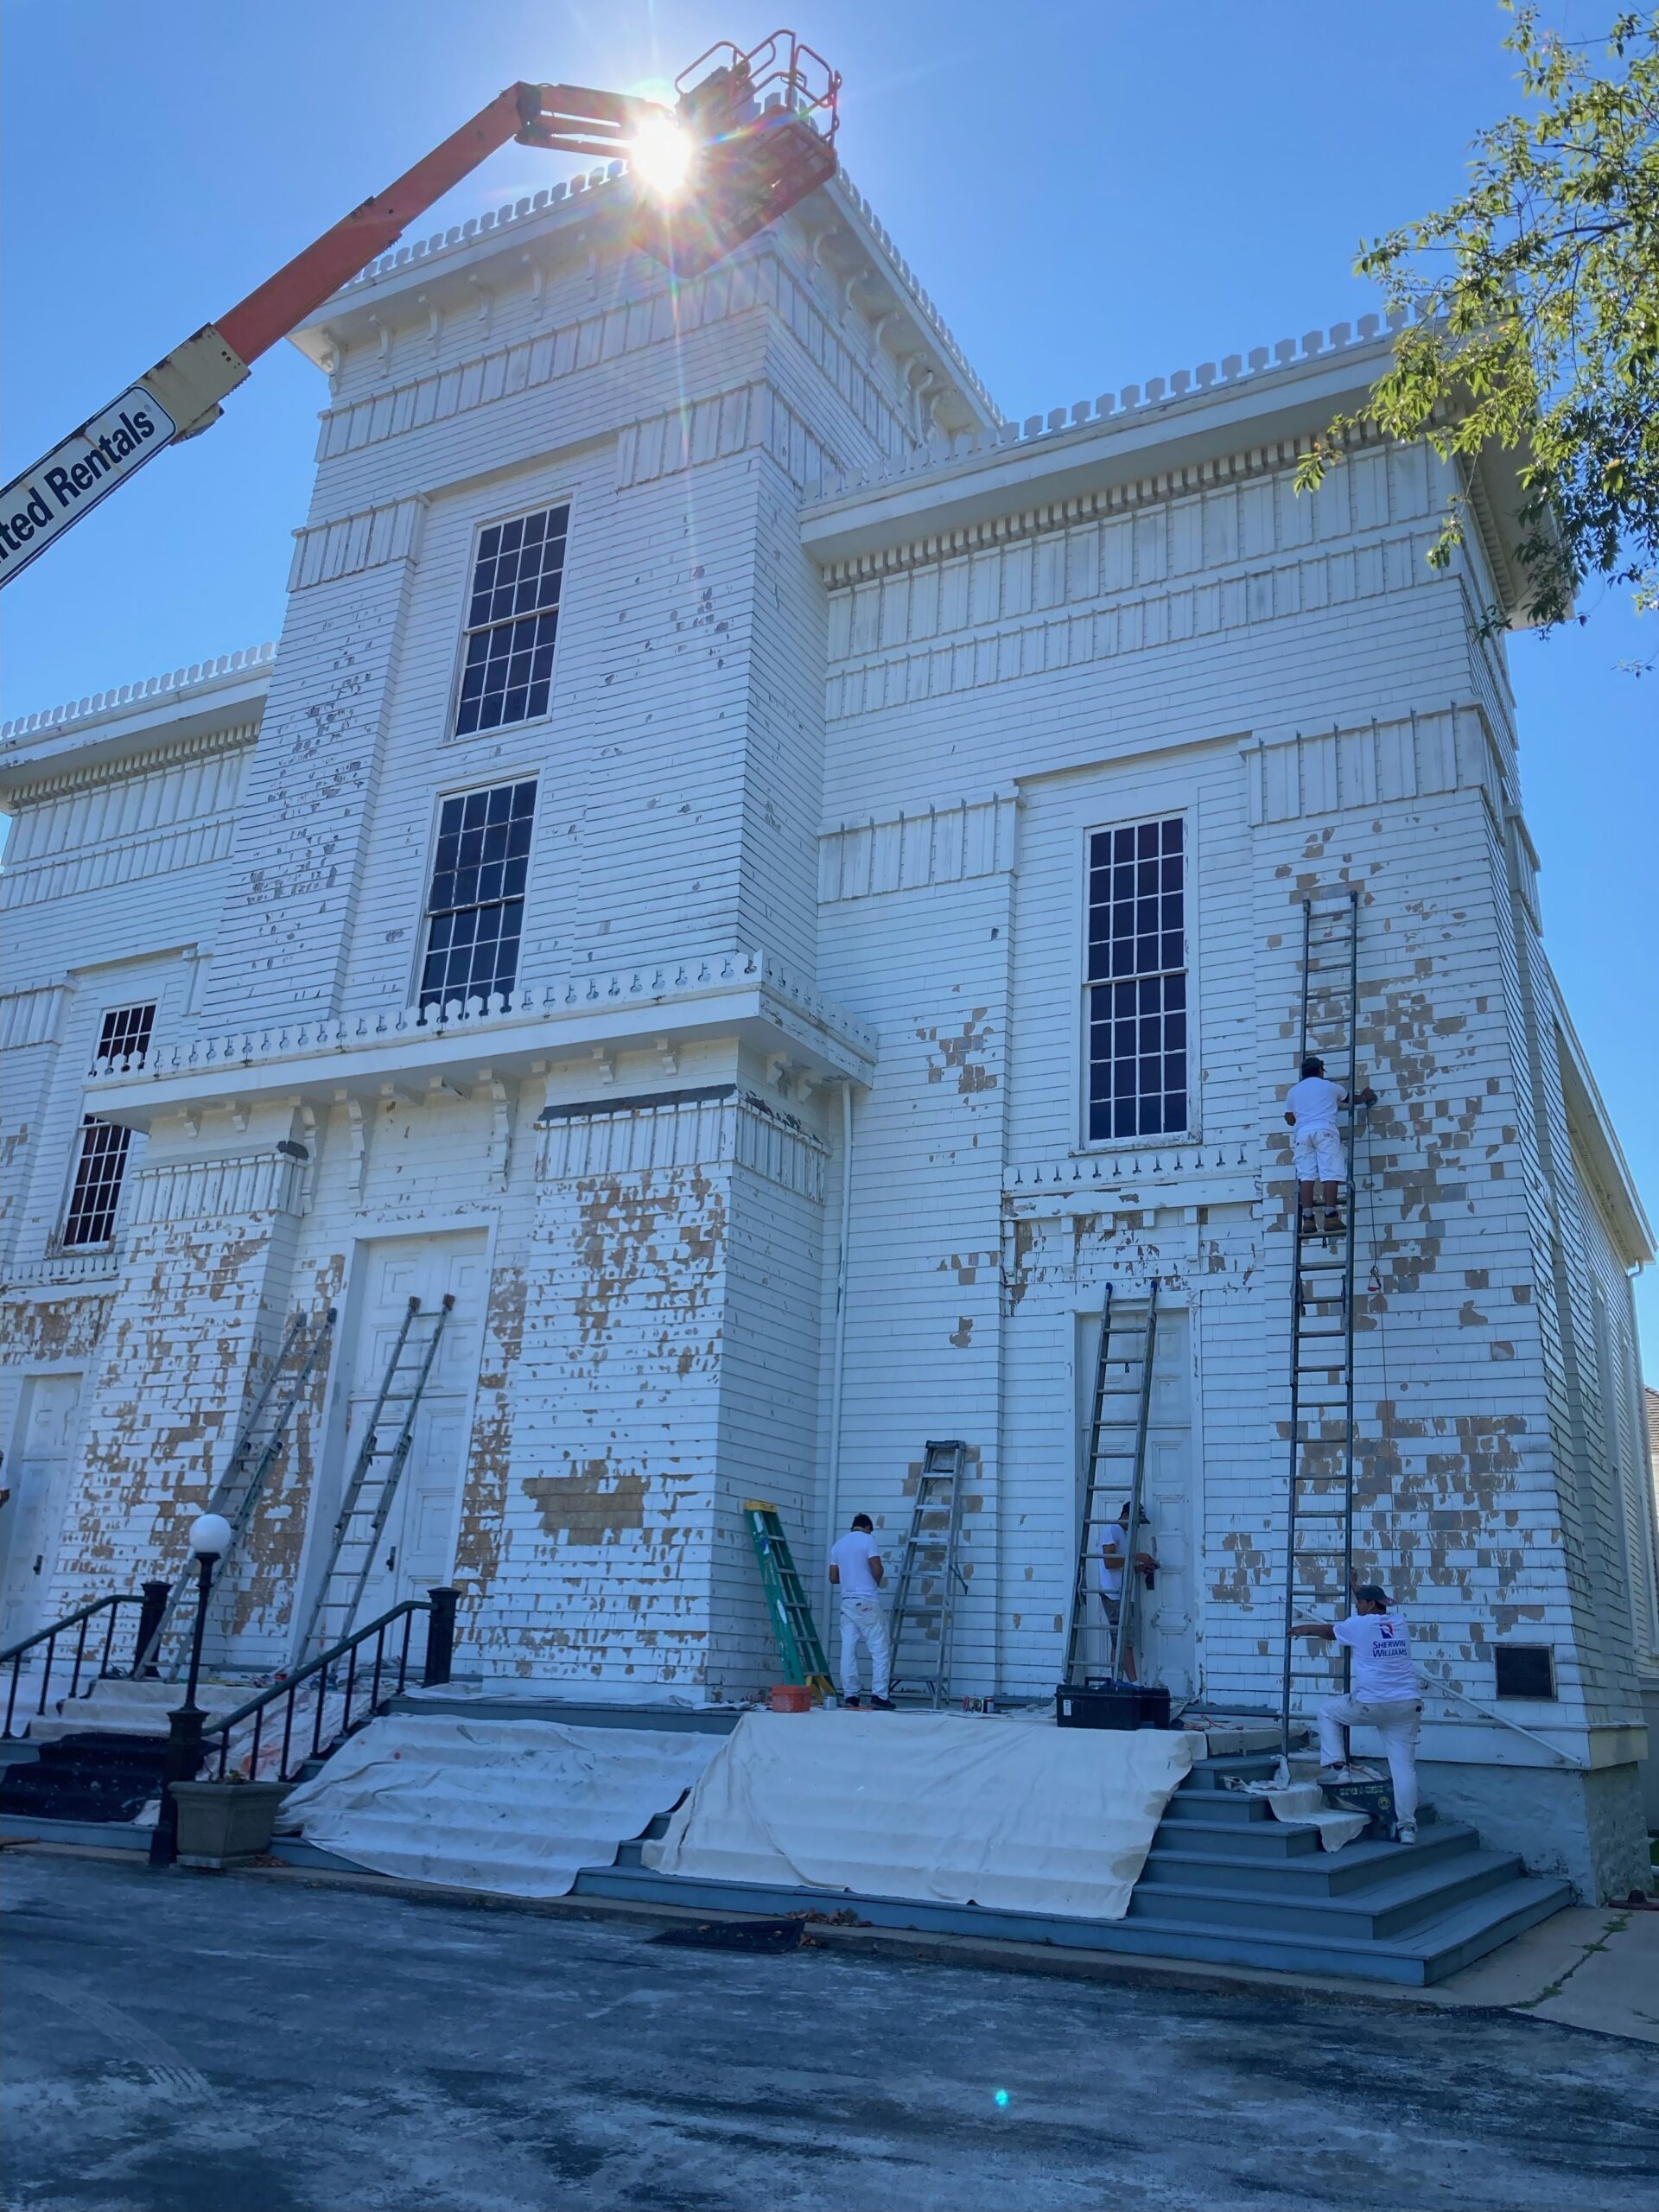 Workers started to repaint the facade of the Old Whalers' Church in Sag Harbor last week. ED DEYERMOND